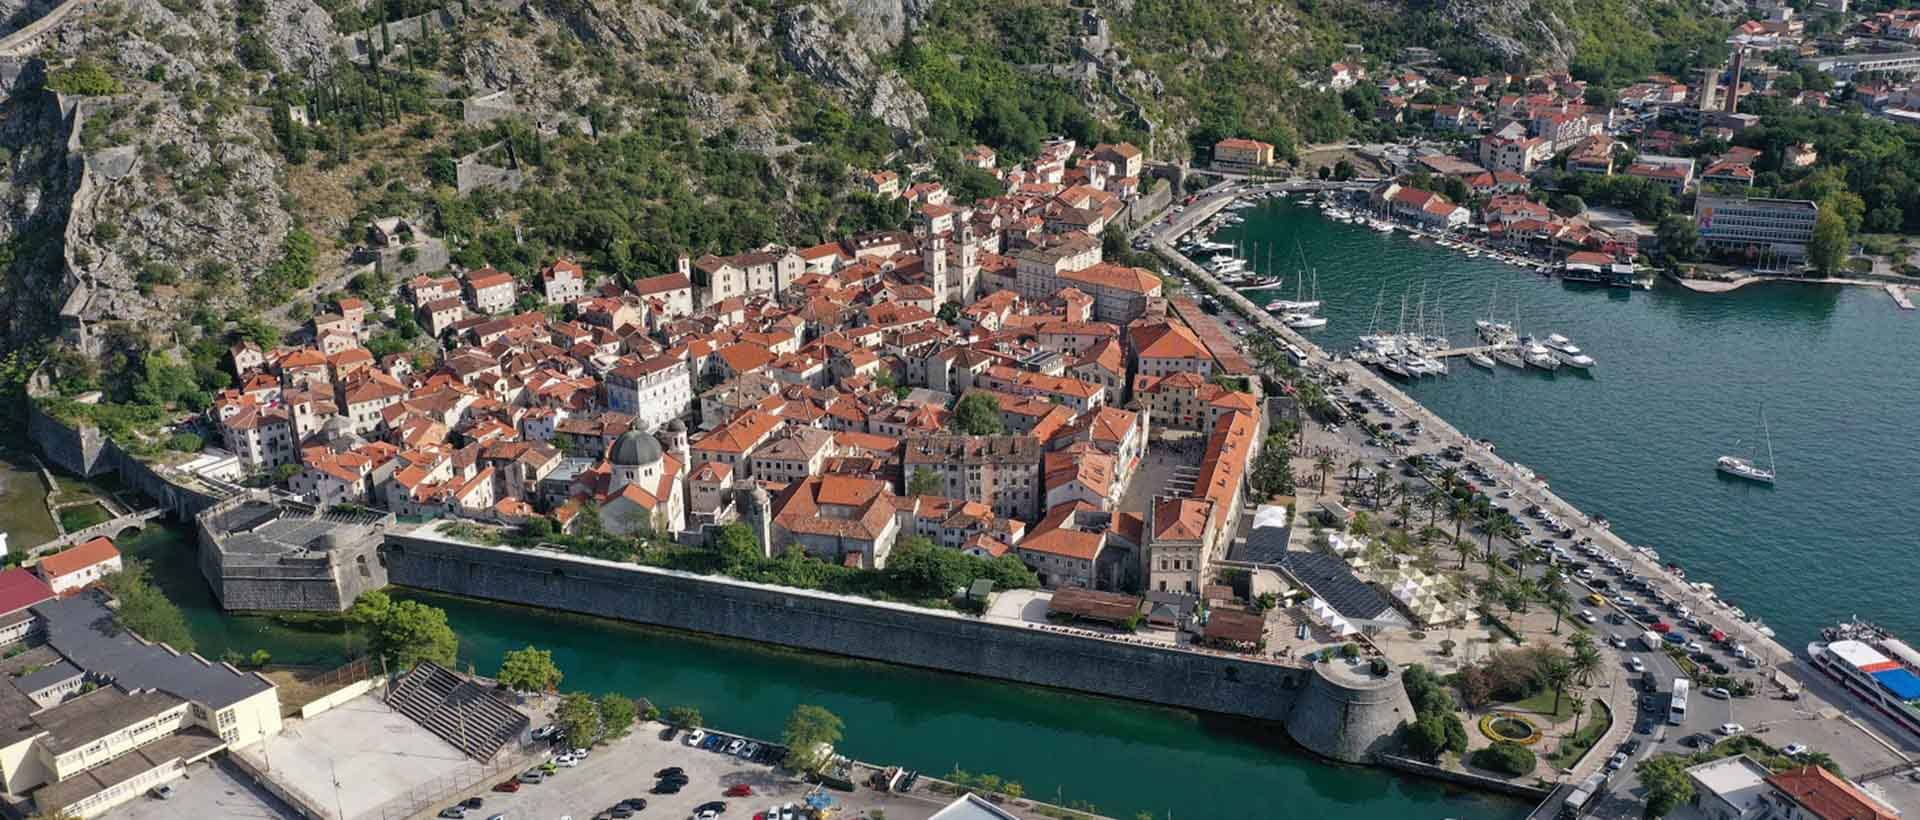 Drone view of Old Town Kotor, with Kotor marina and yachts inside it. Roofs of local houses are visible, inside this fortified town.